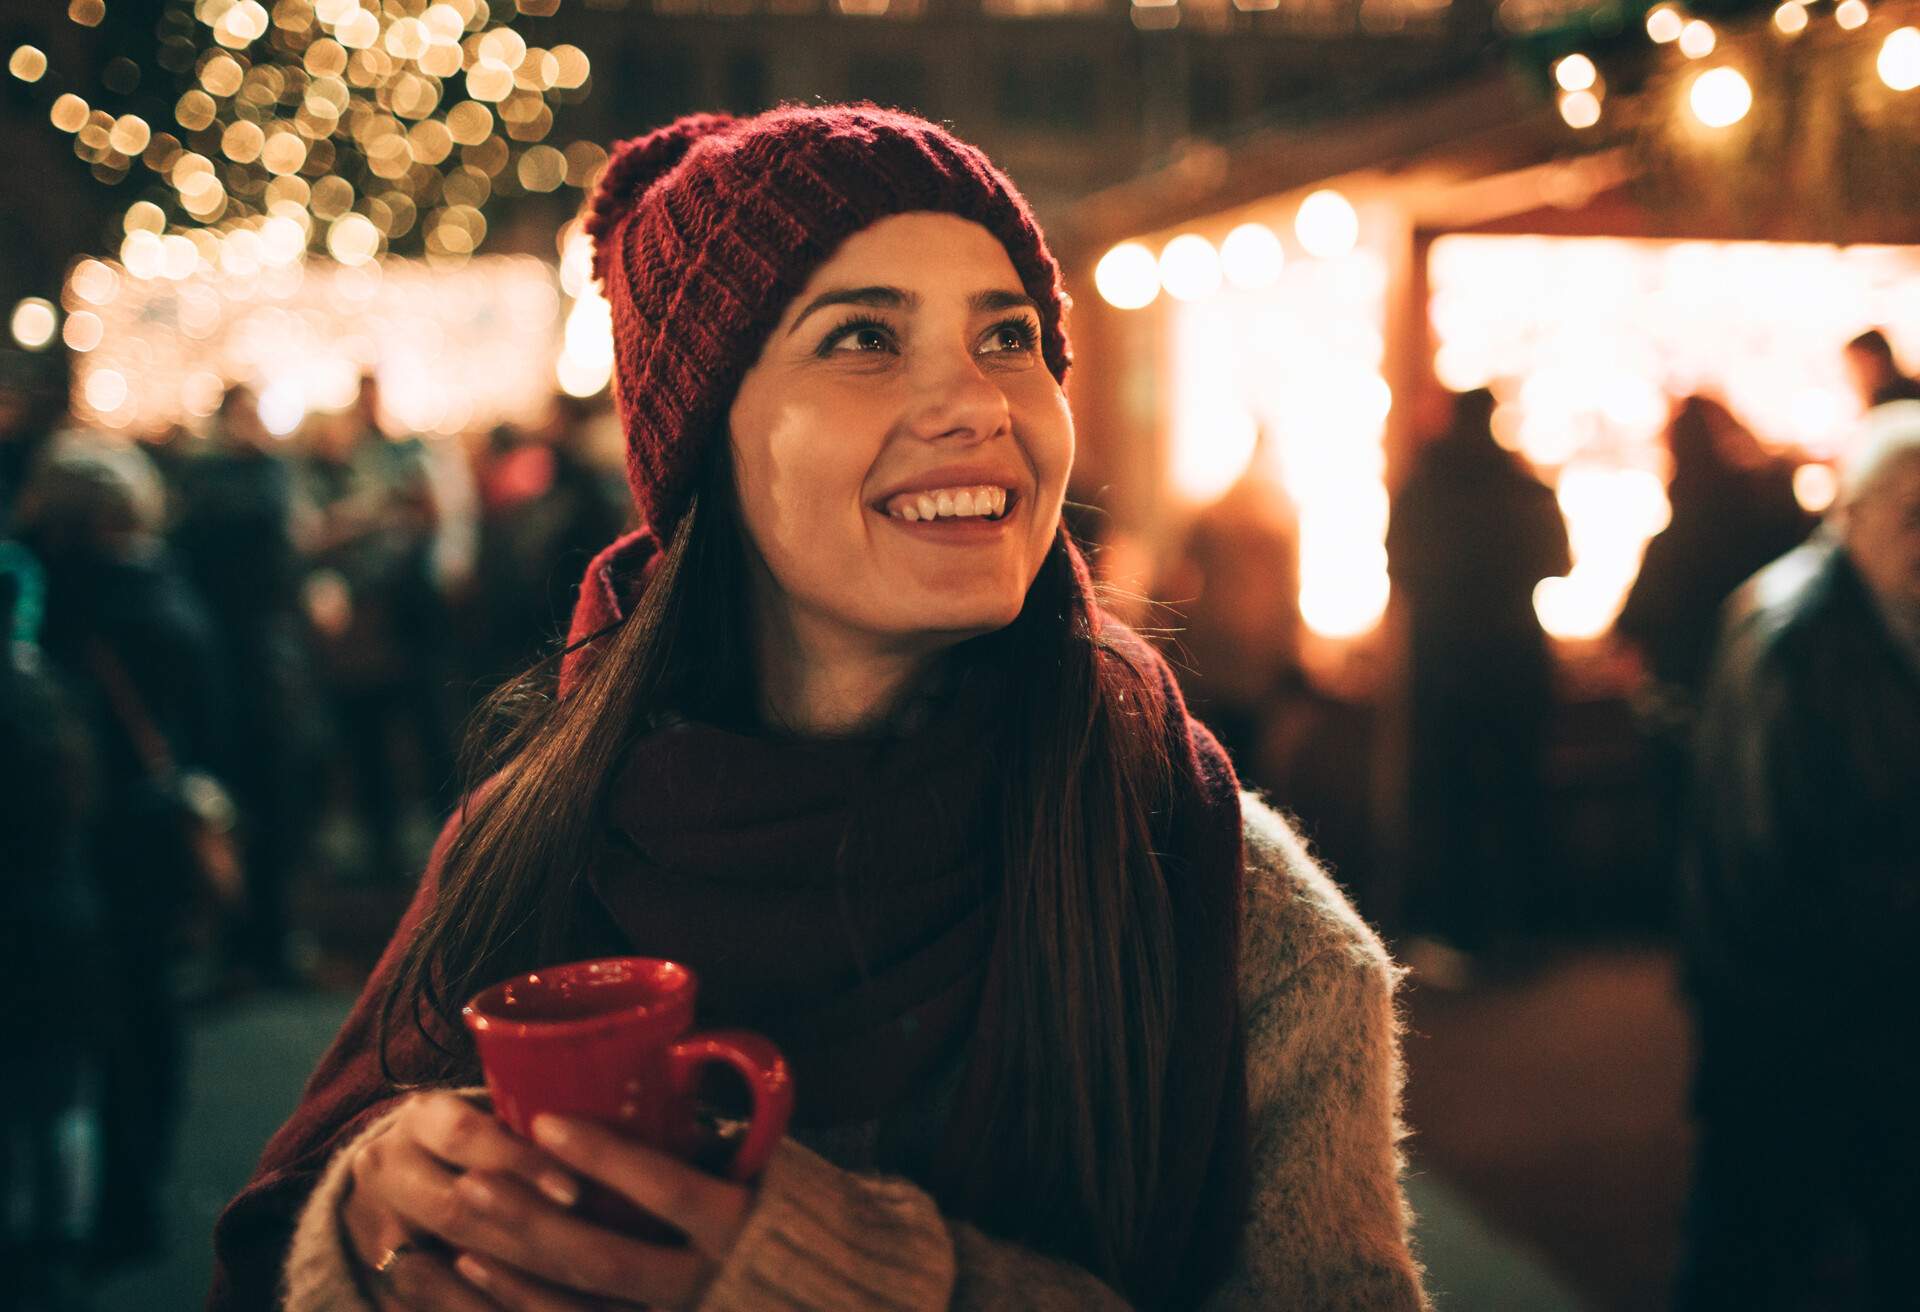 A woman in winter clothes holding a red mug and smiling while looking up